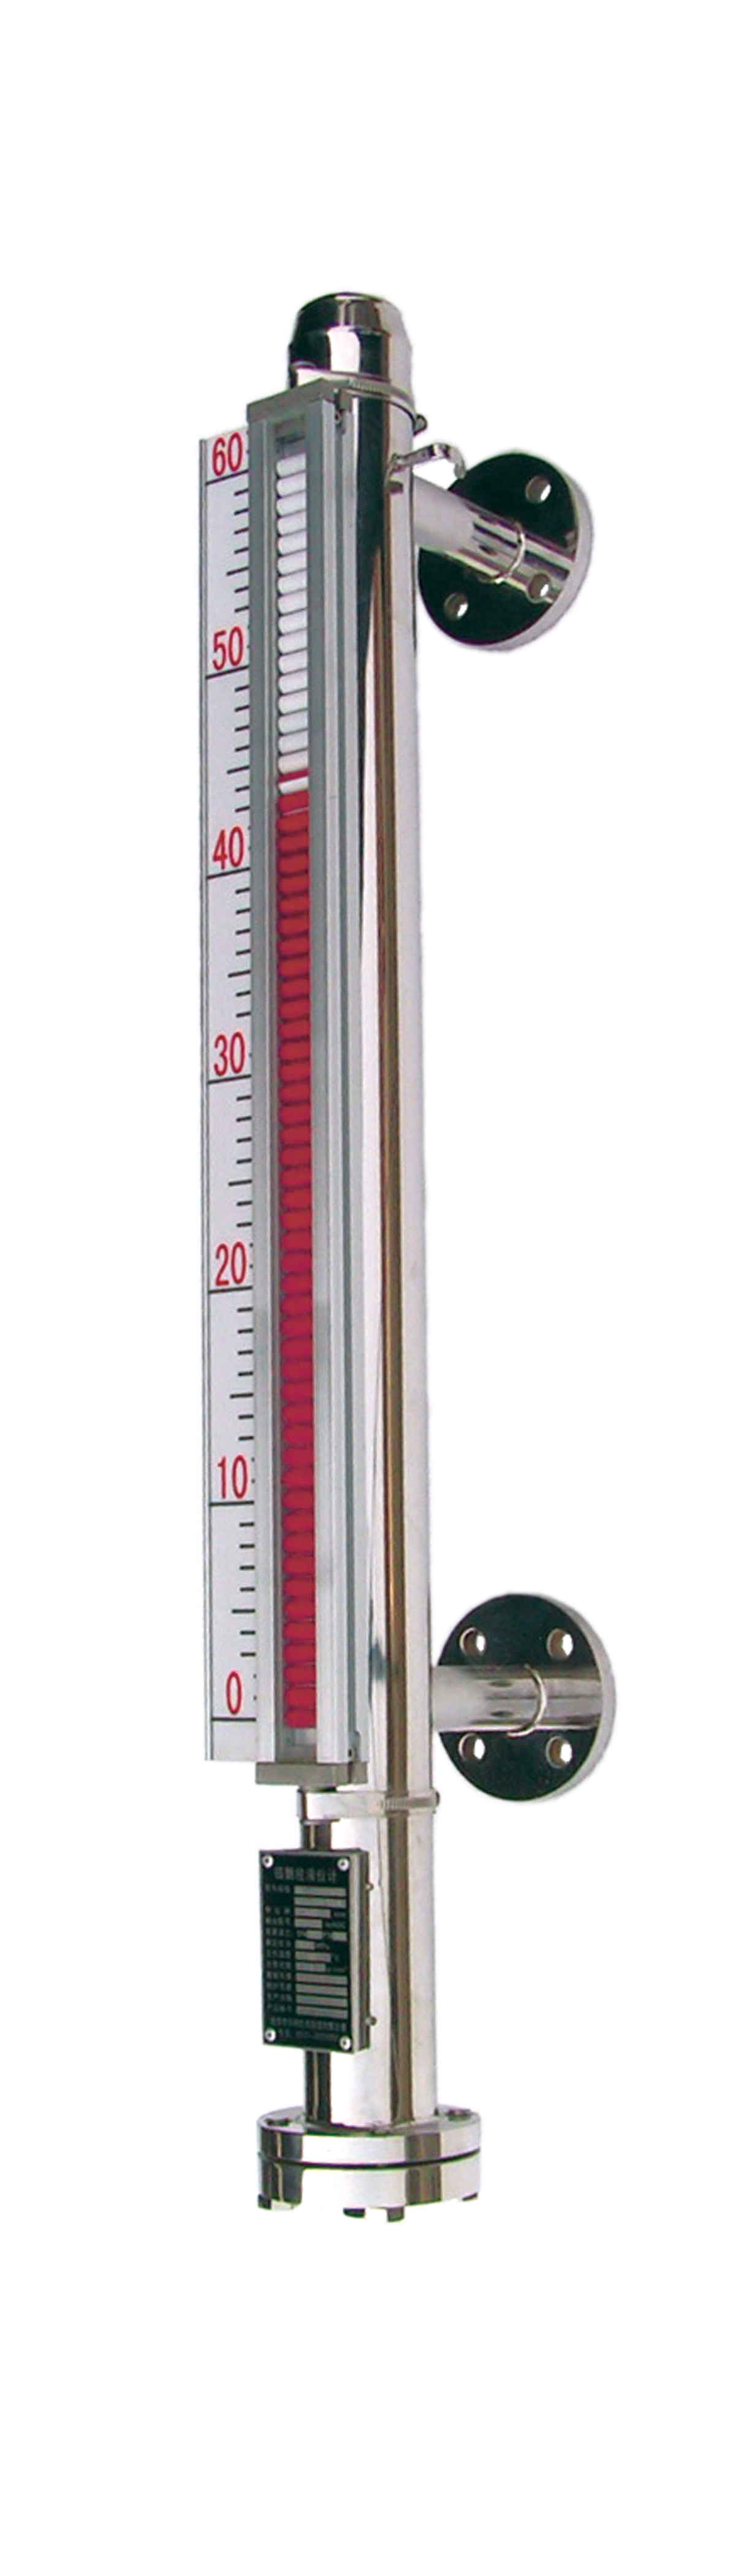 Side-mounted magnetic float level gauge to ensure safe and accurate measurement